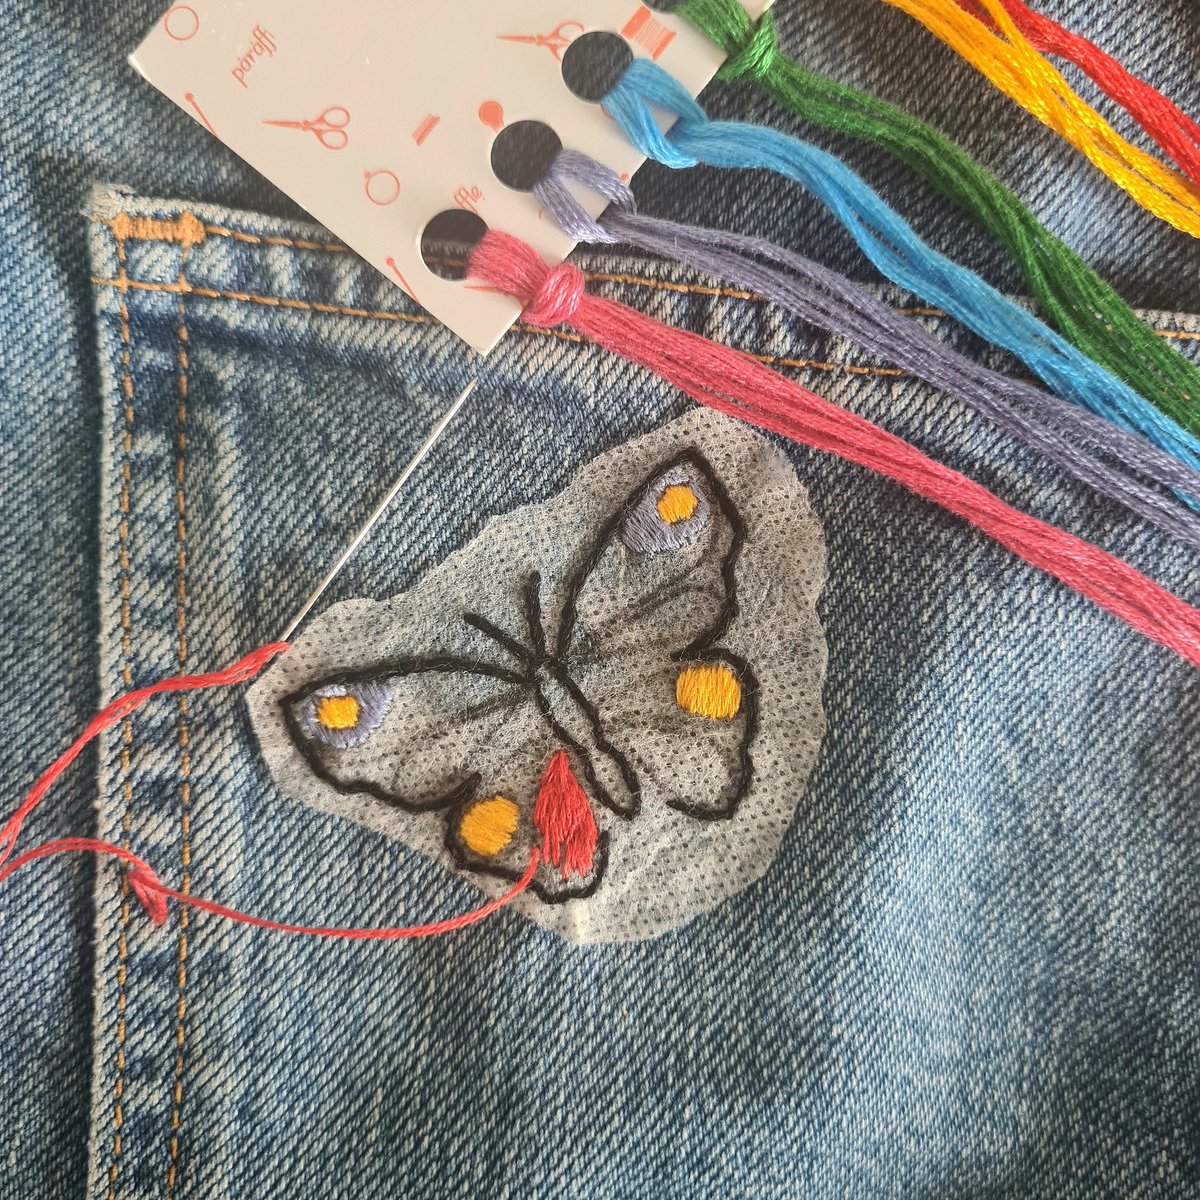 My dungarees have been out of action for weeks now because of this little half finished design 🦋 the fact that I've found time to sit down and finish them must mean I'm having a relaxing weekend! 🙂 #embroidery #craft